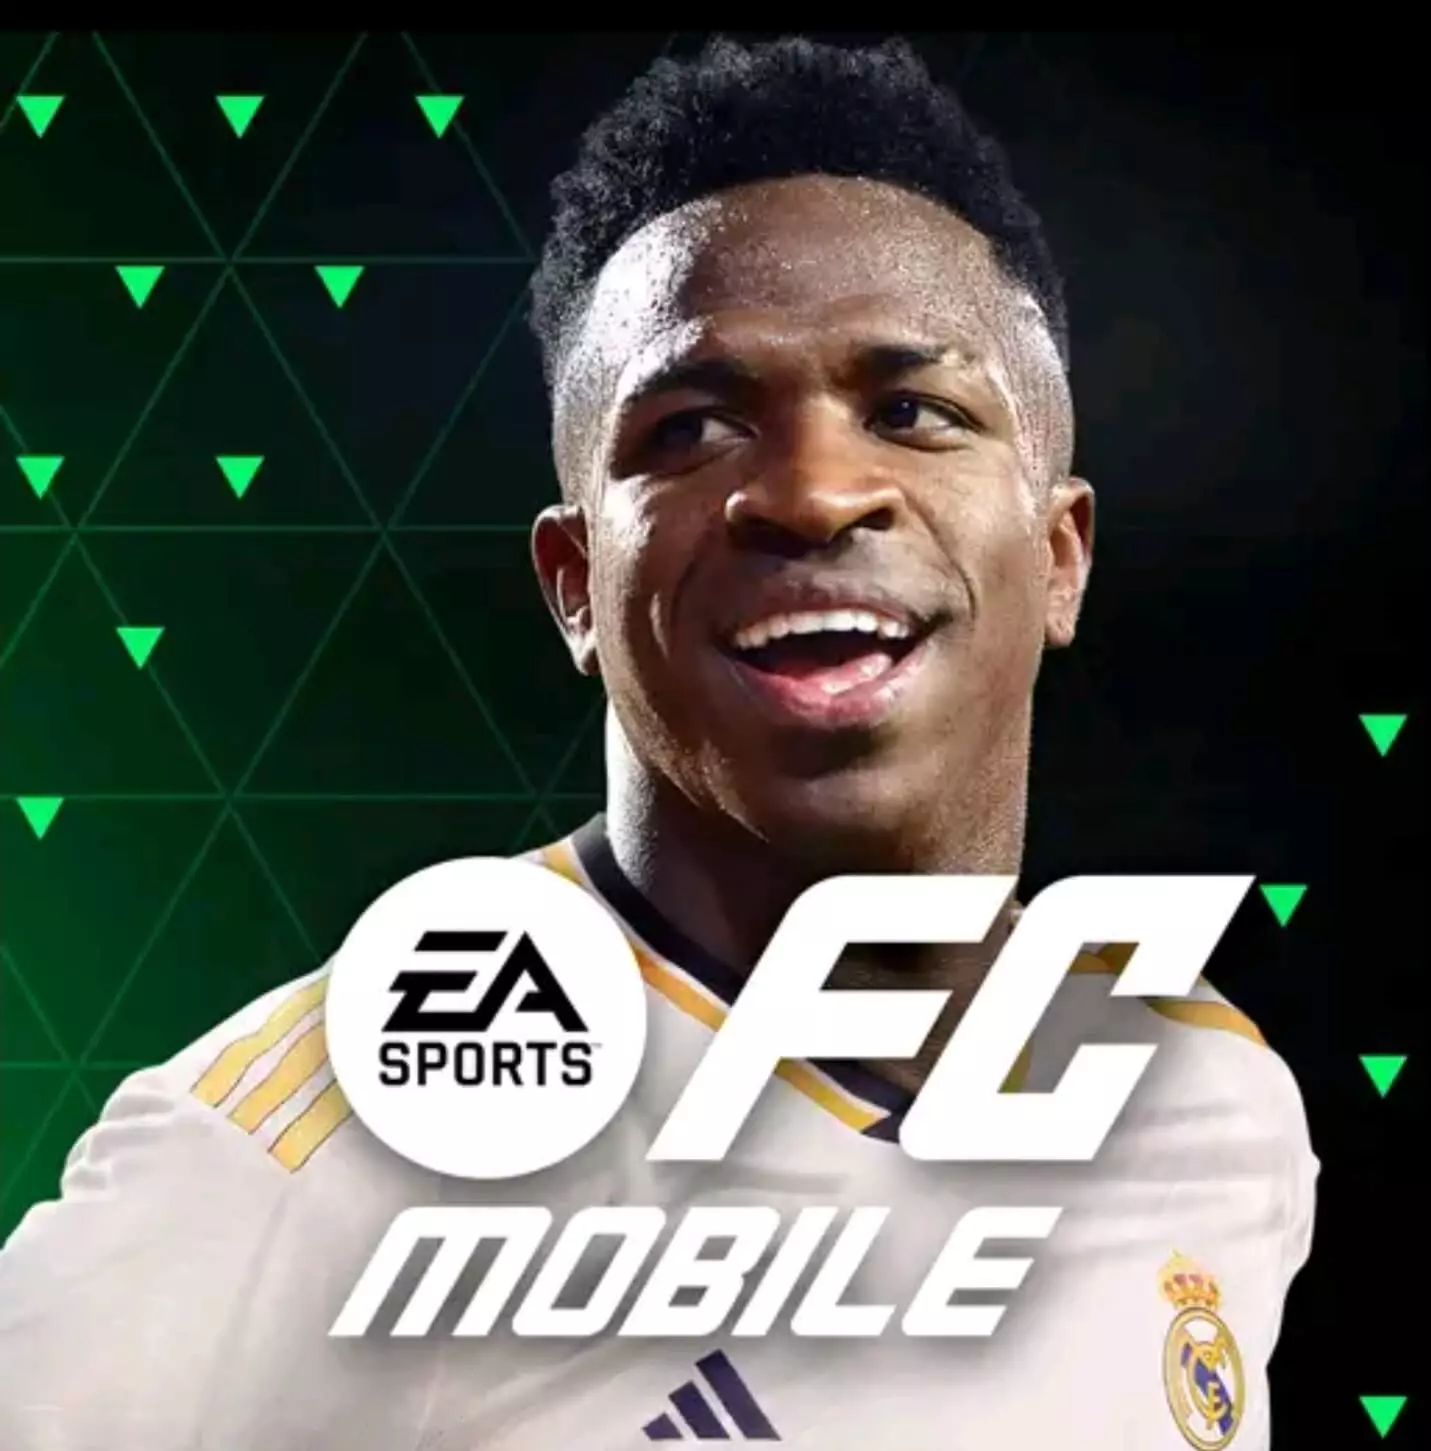 Enjoy an exciting soccer game with realistic graphics, just try FIFA Mobile  Mod Apk free unlimited Money, Points, and al…